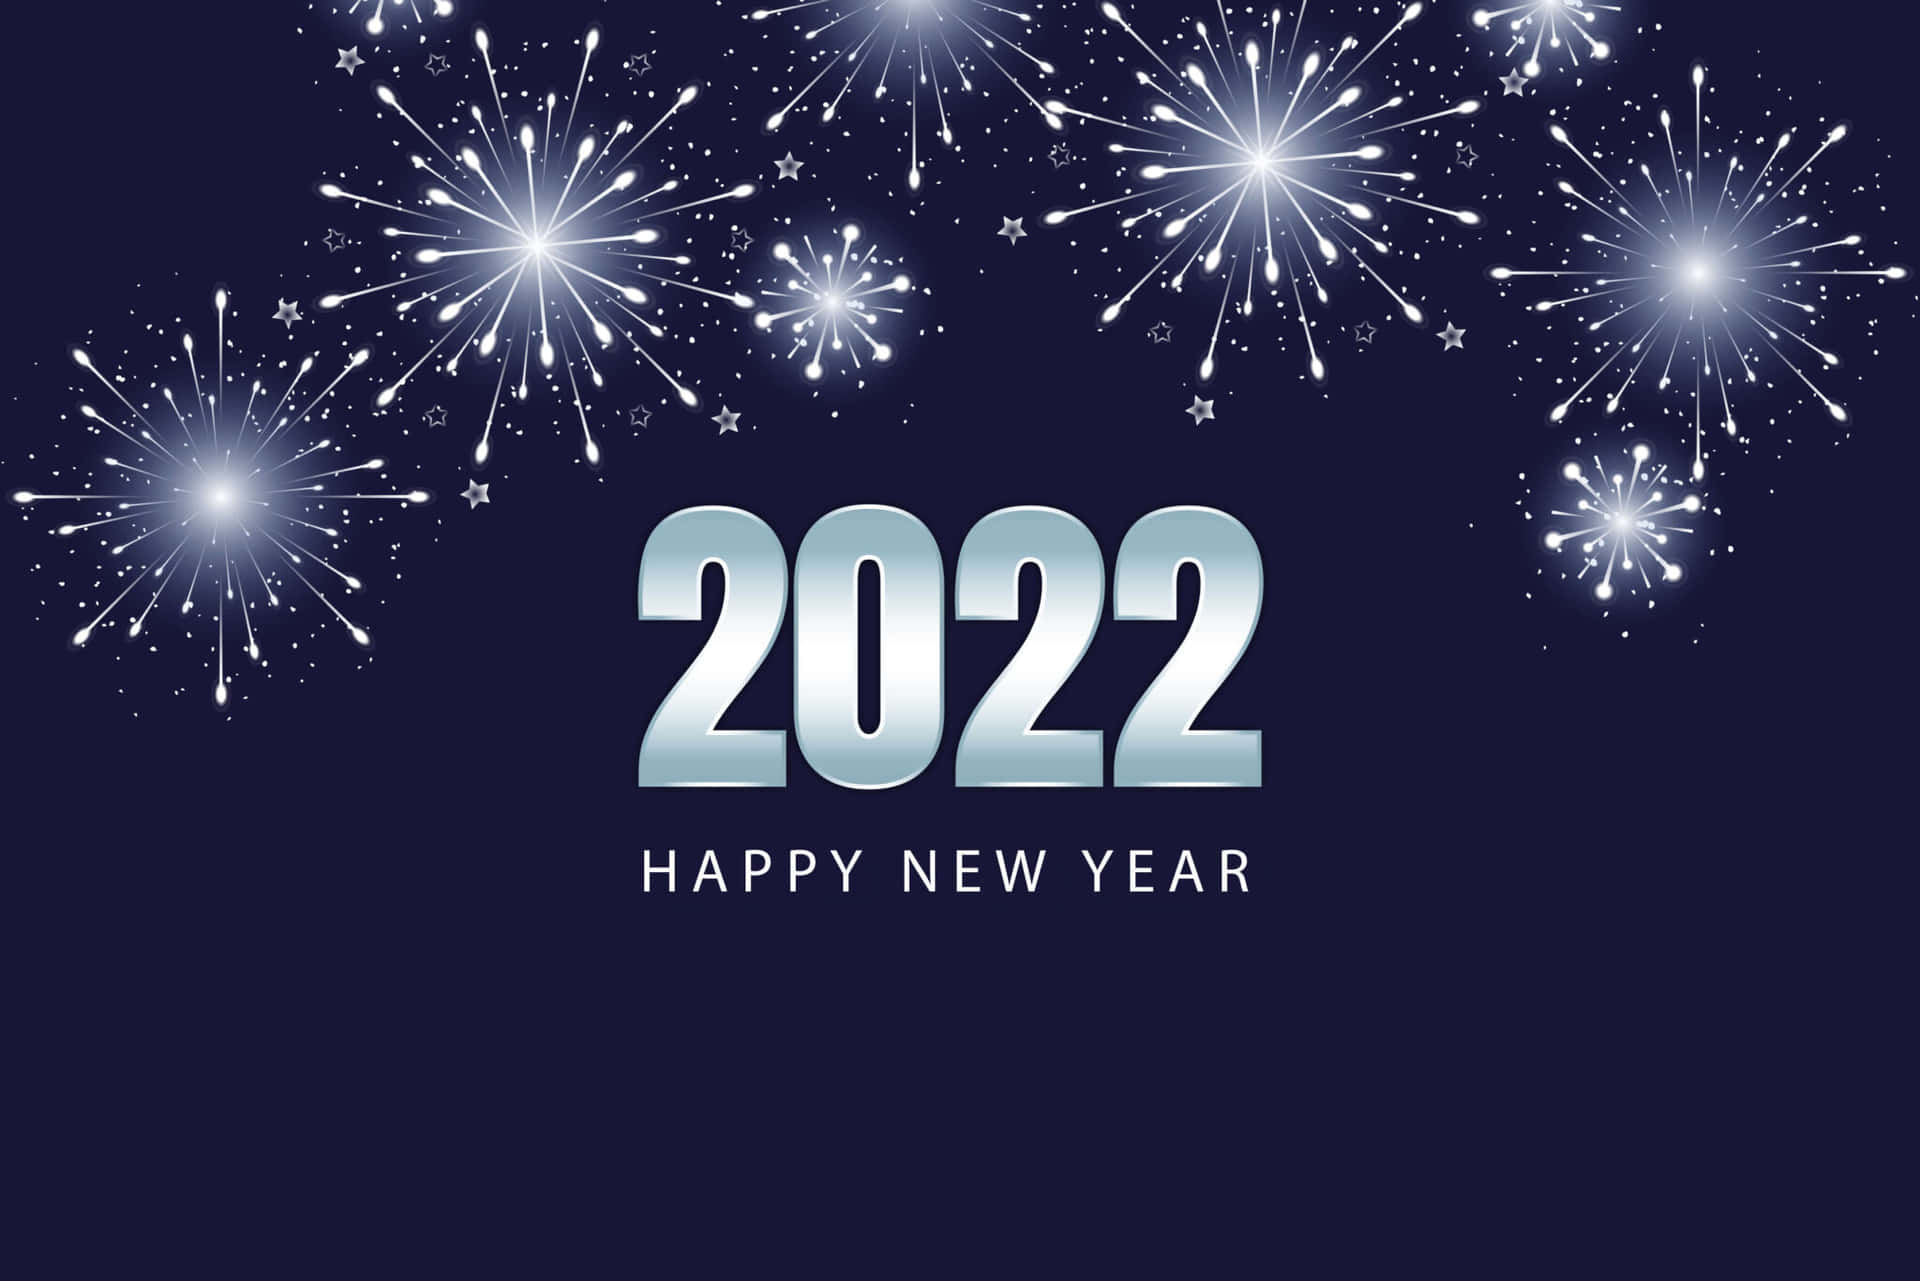 Wish you a Happy New Year 2022!